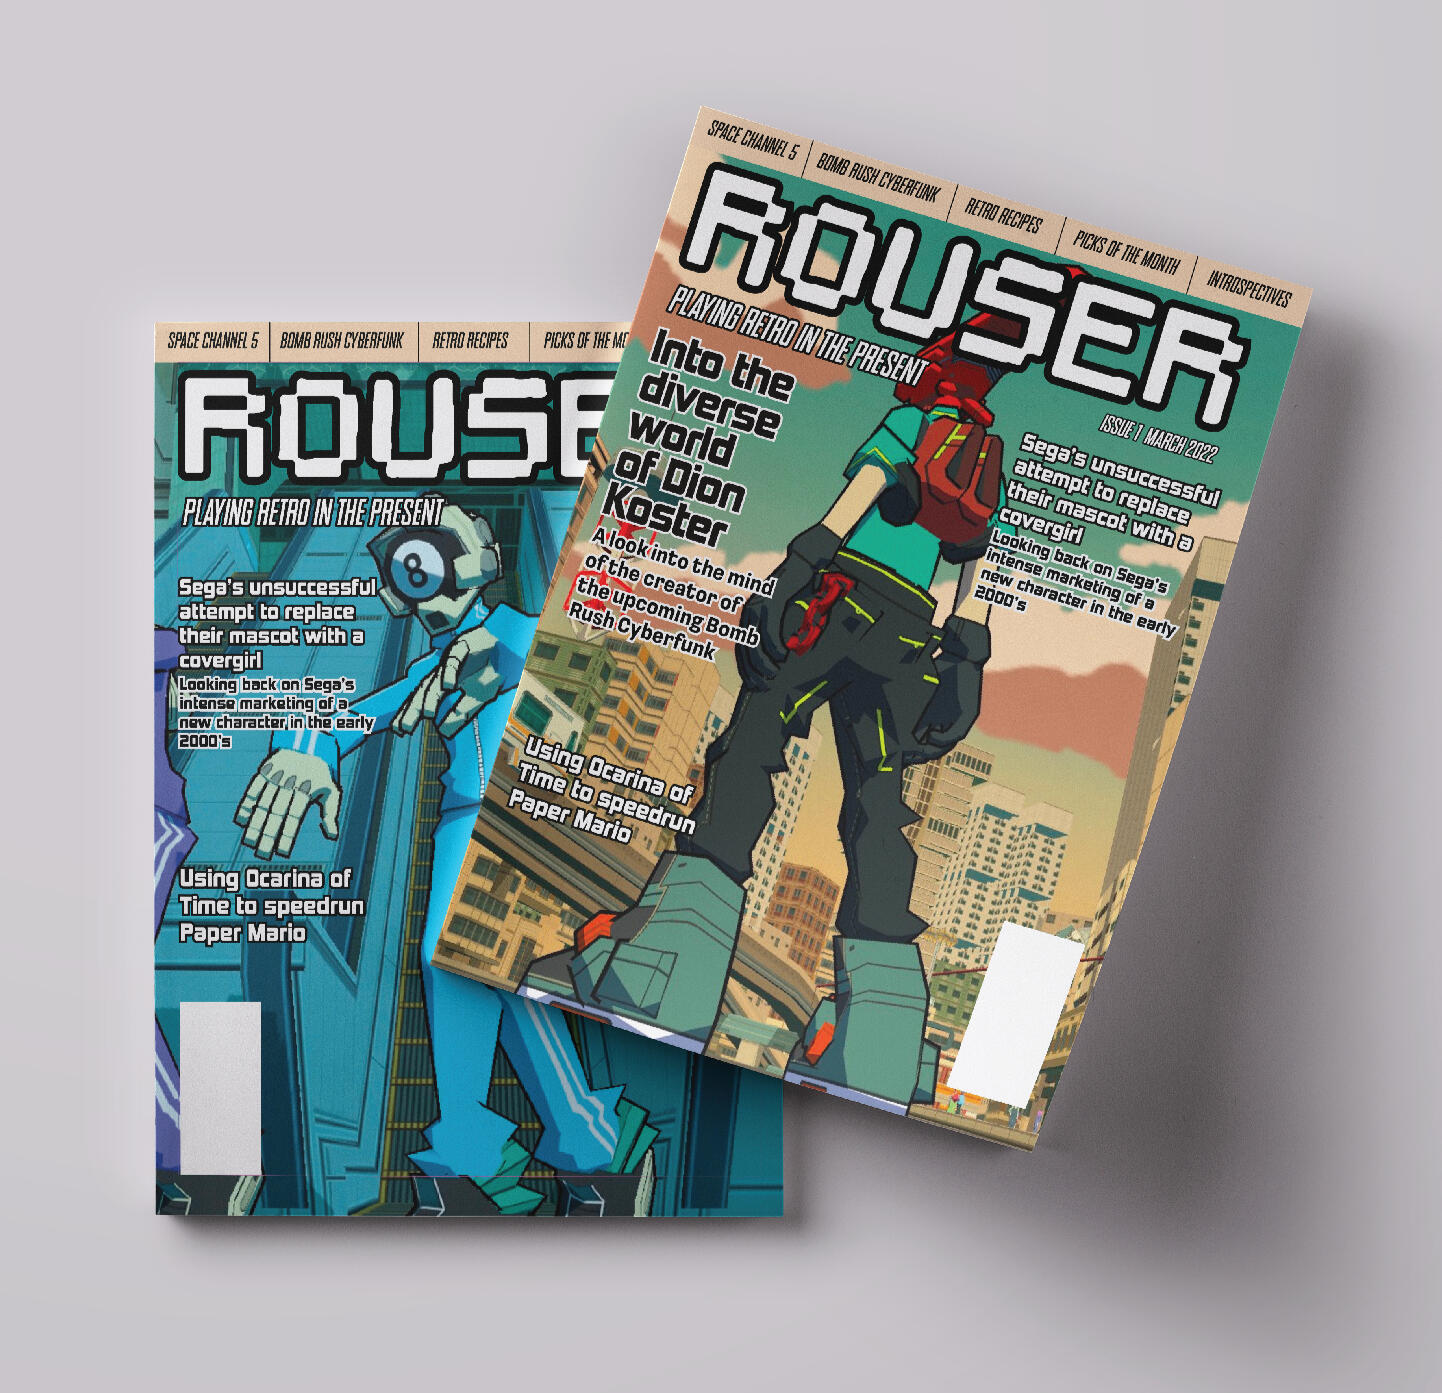 The front covers of the theoretical 'Rouser' magazine.